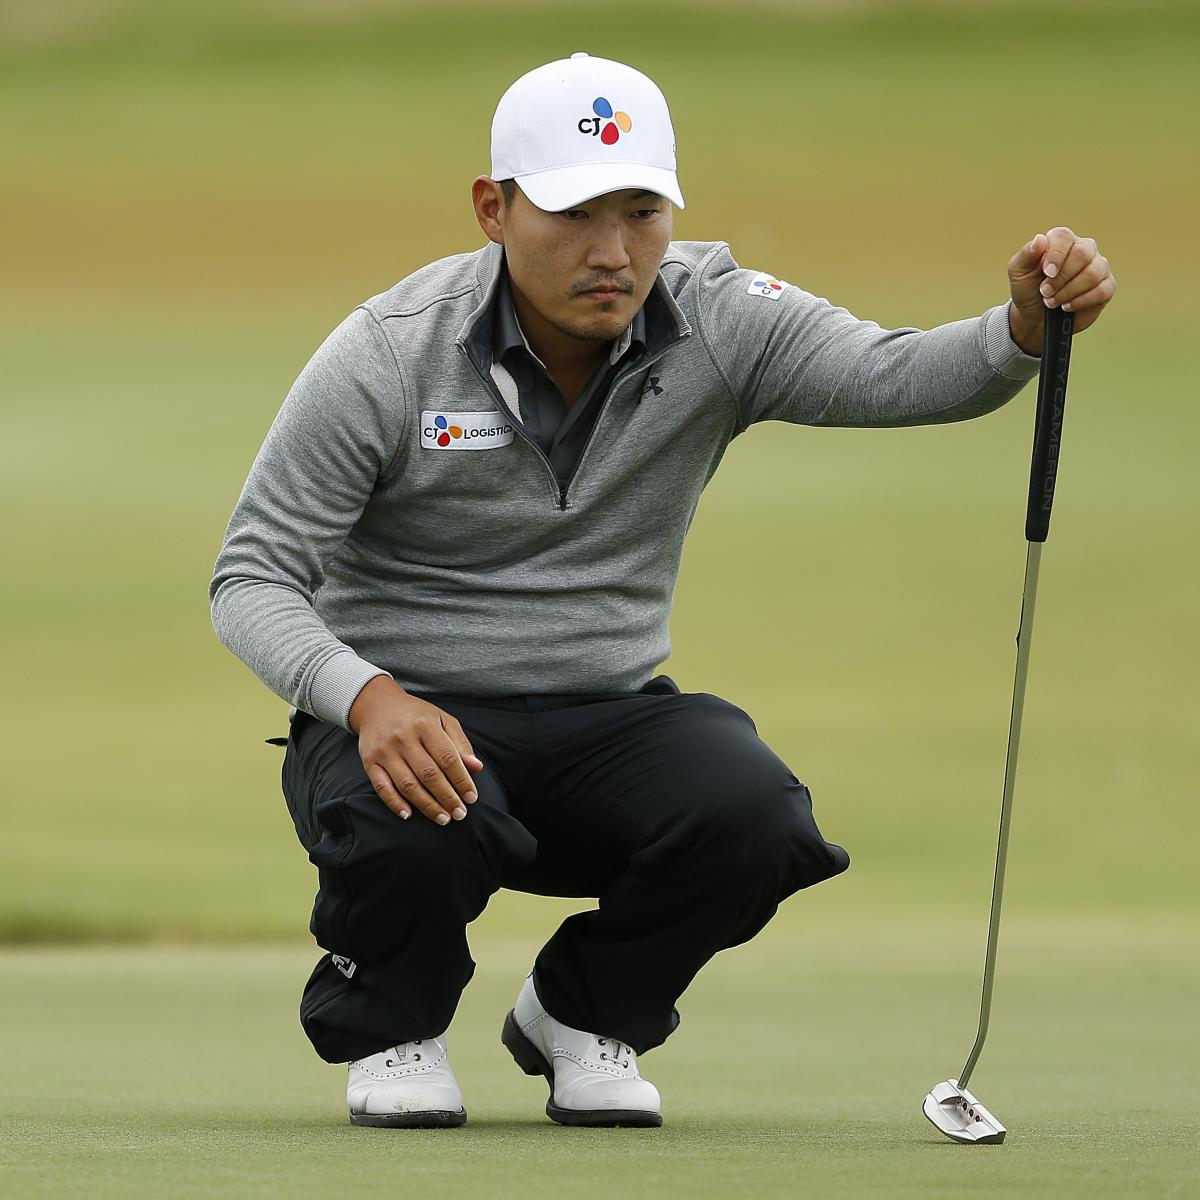 AT&T Byron Nelson 2019: Sung Kang Leads at 16 Under Par After Round 2 byron nelson leaderboard 2018